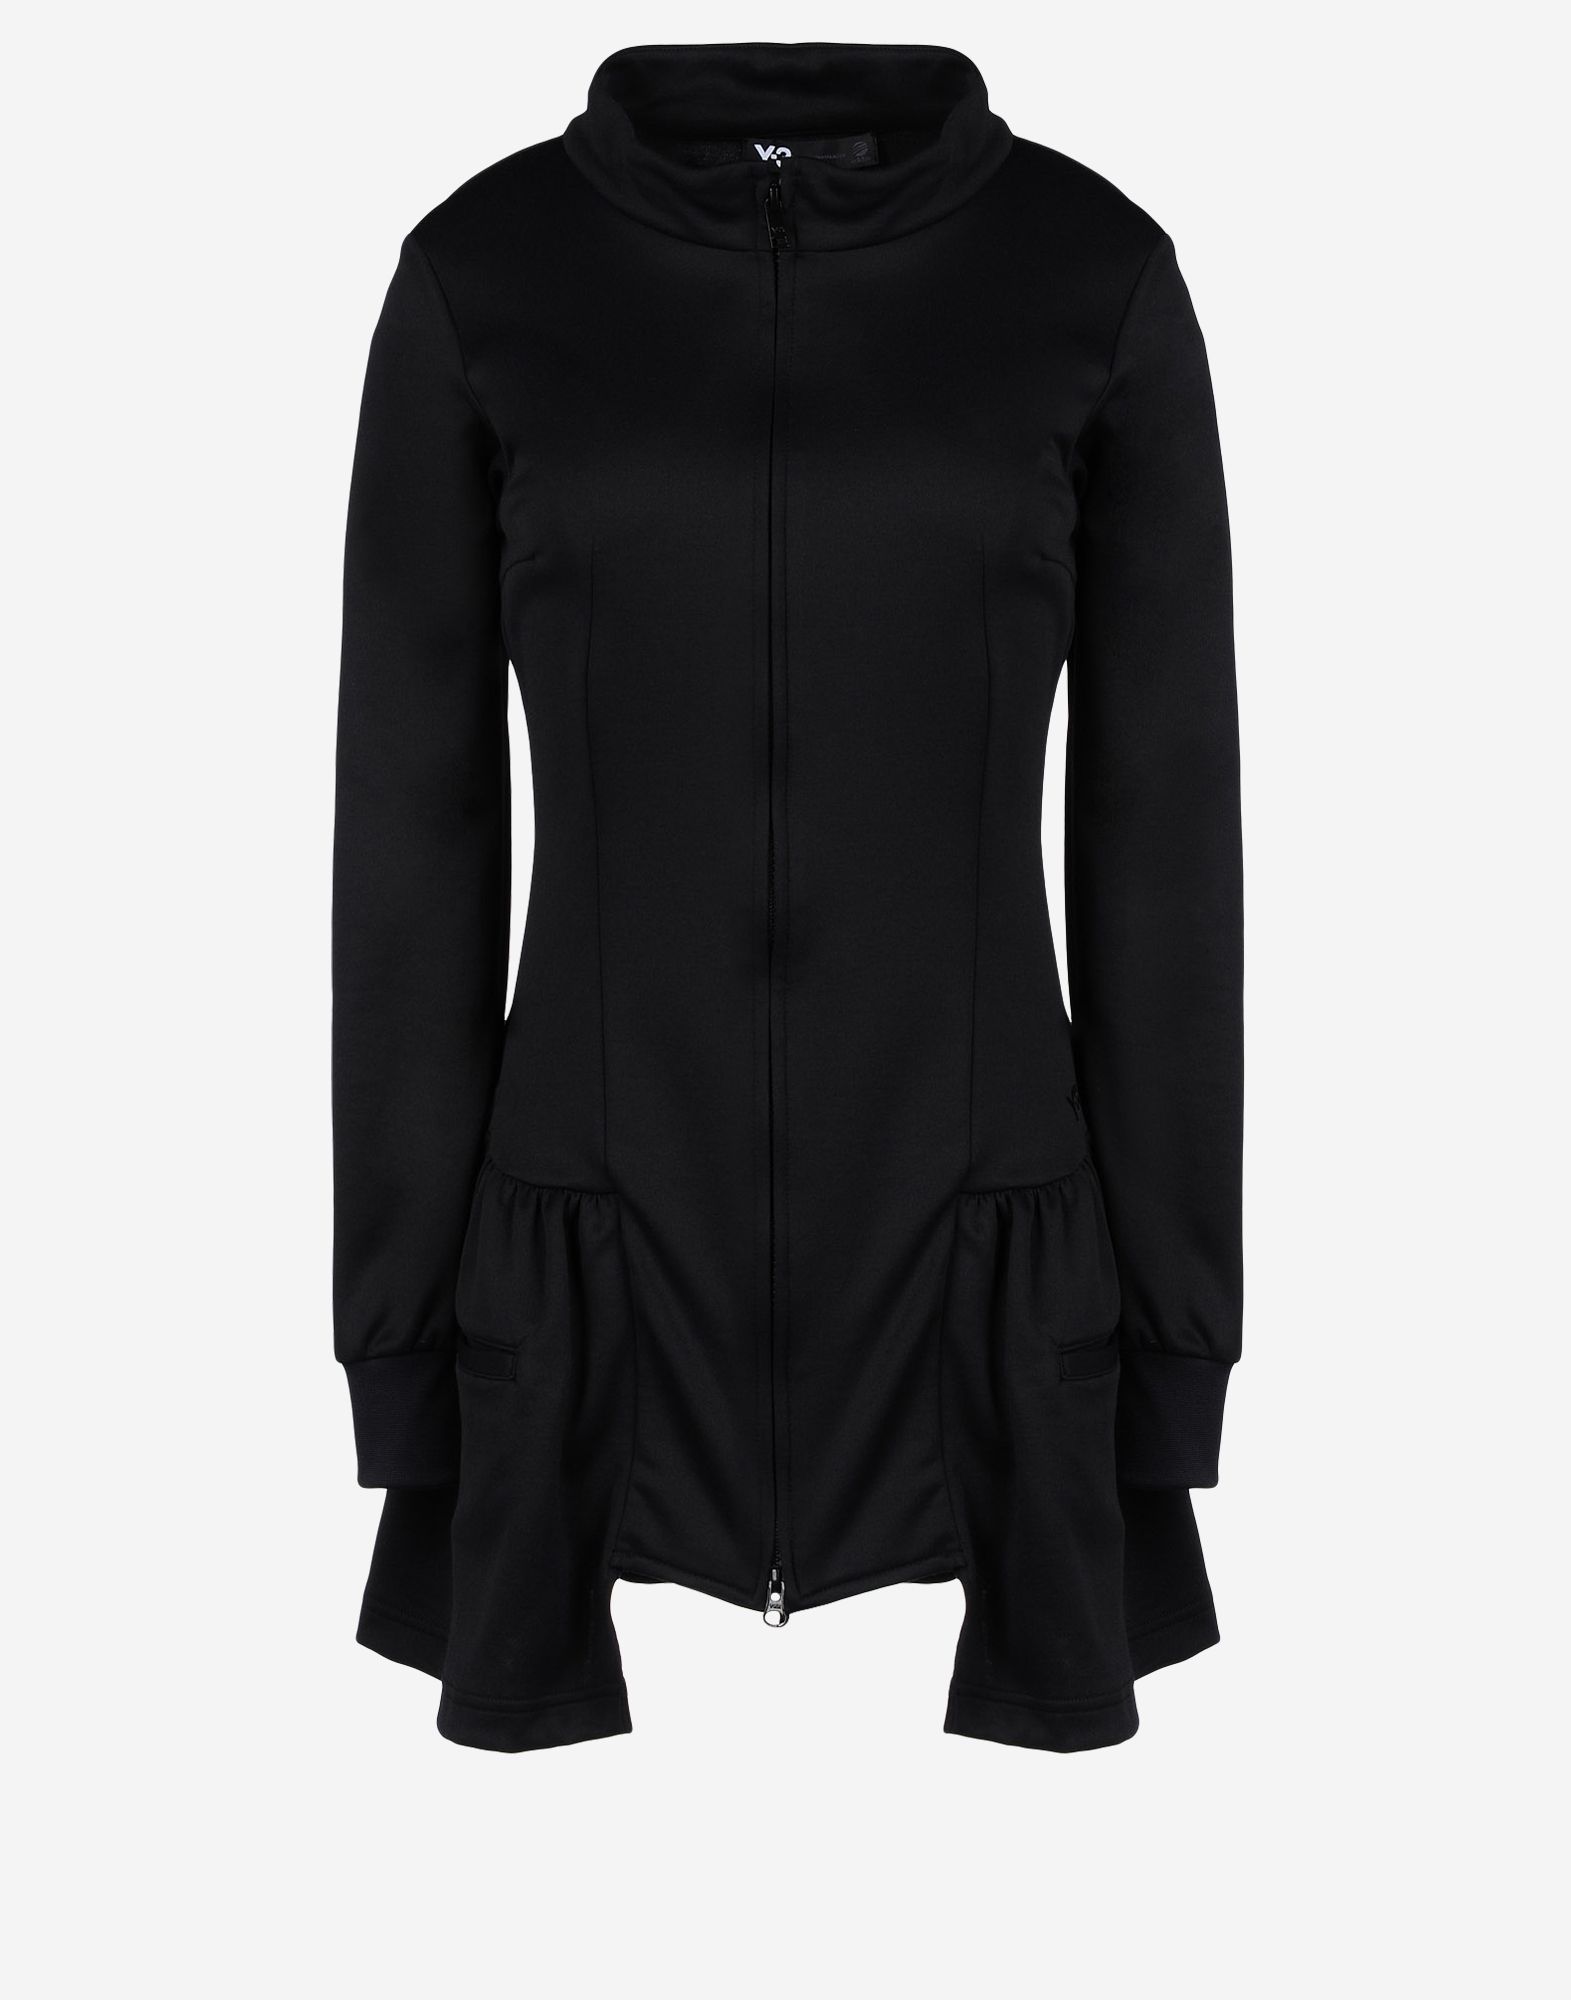 Y 3 Ruffle Track Jacket for Women | Adidas Y-3 Official Store